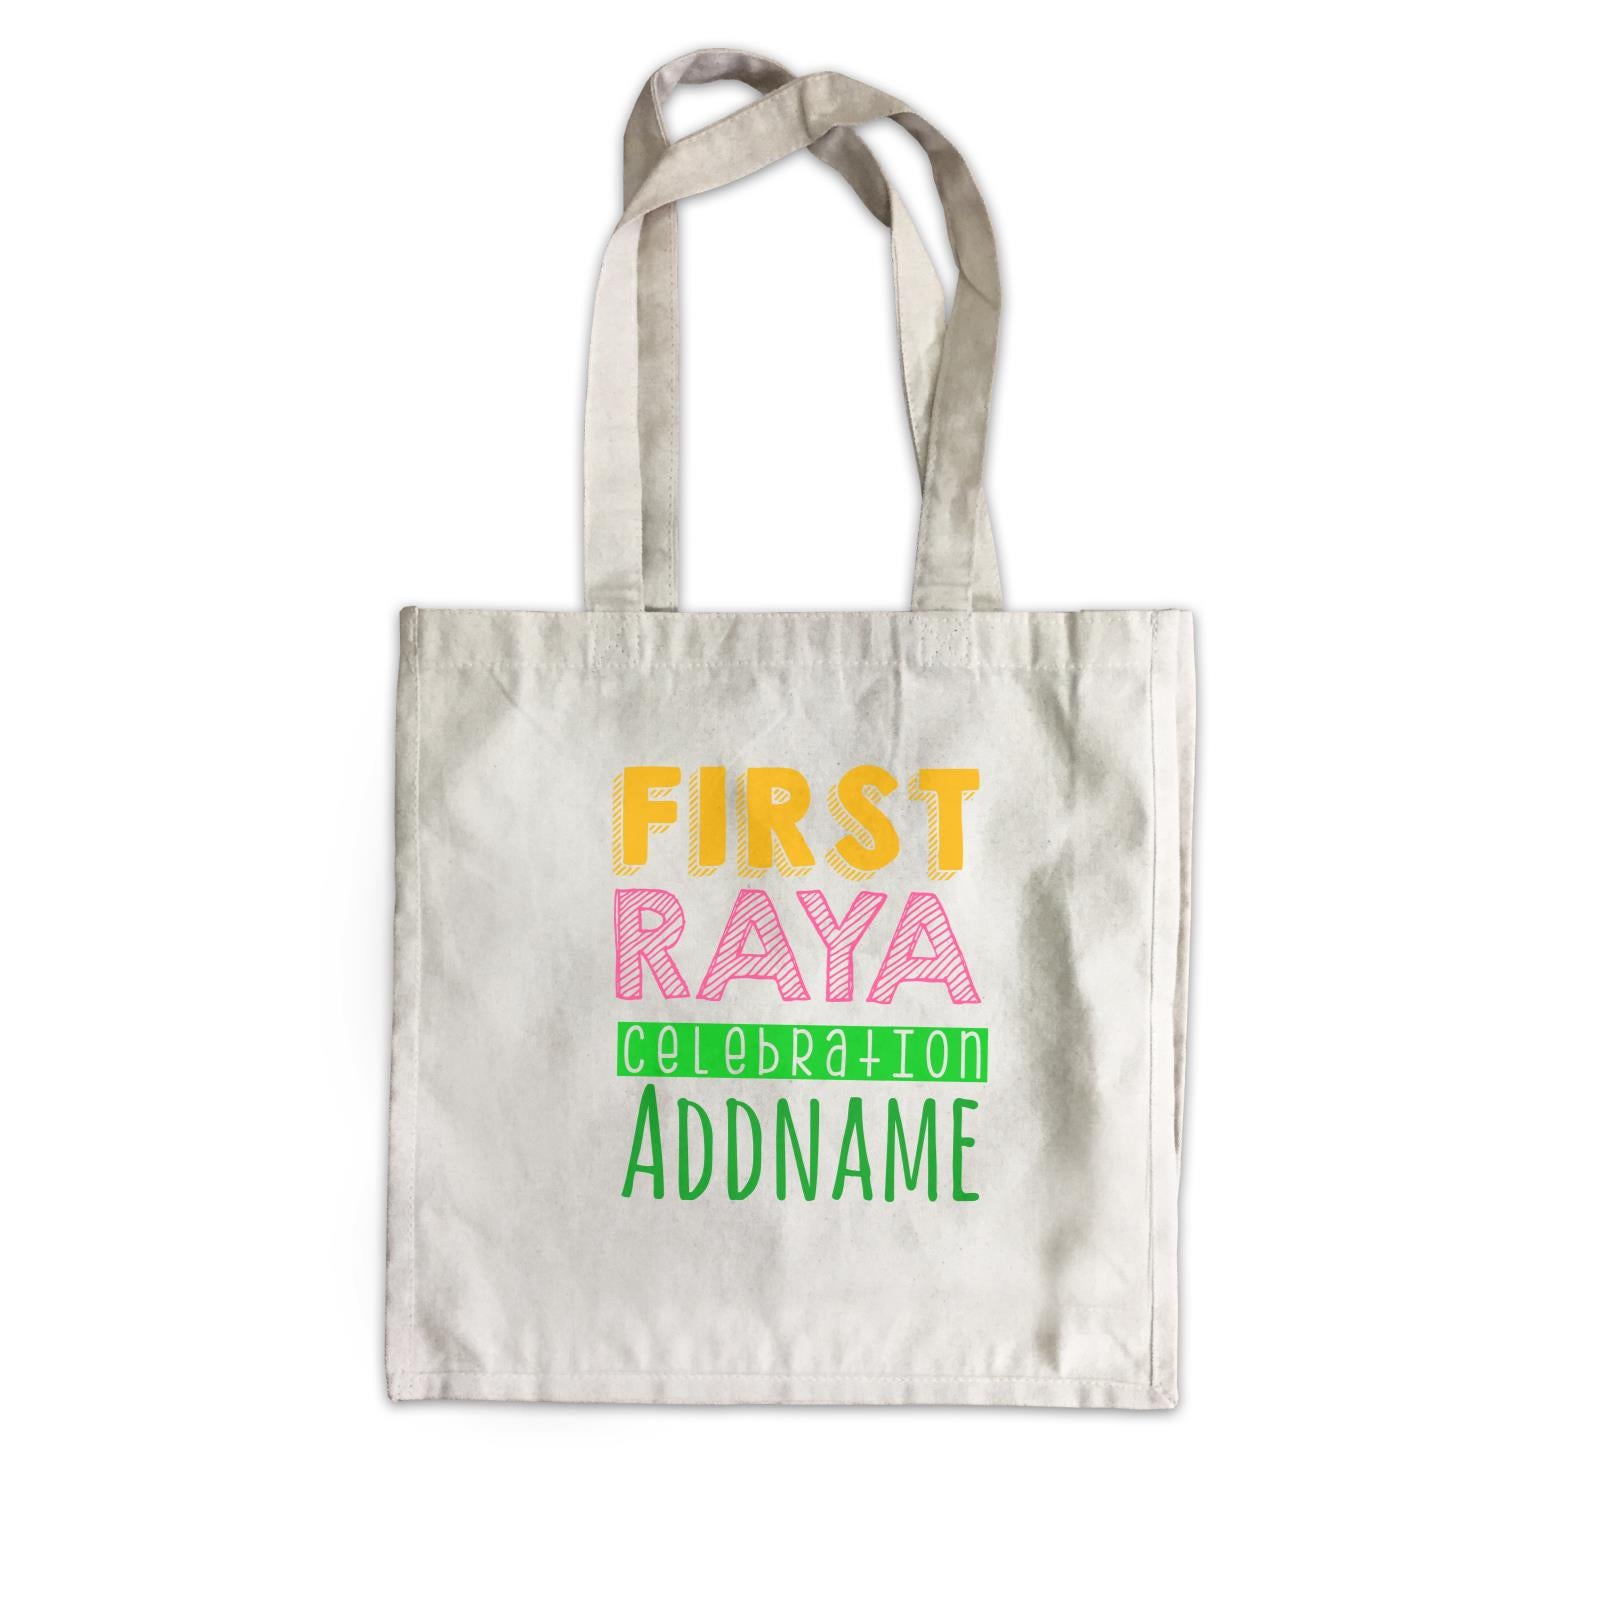 First Raya Celebration Canvas Bag  Personalizable Designs